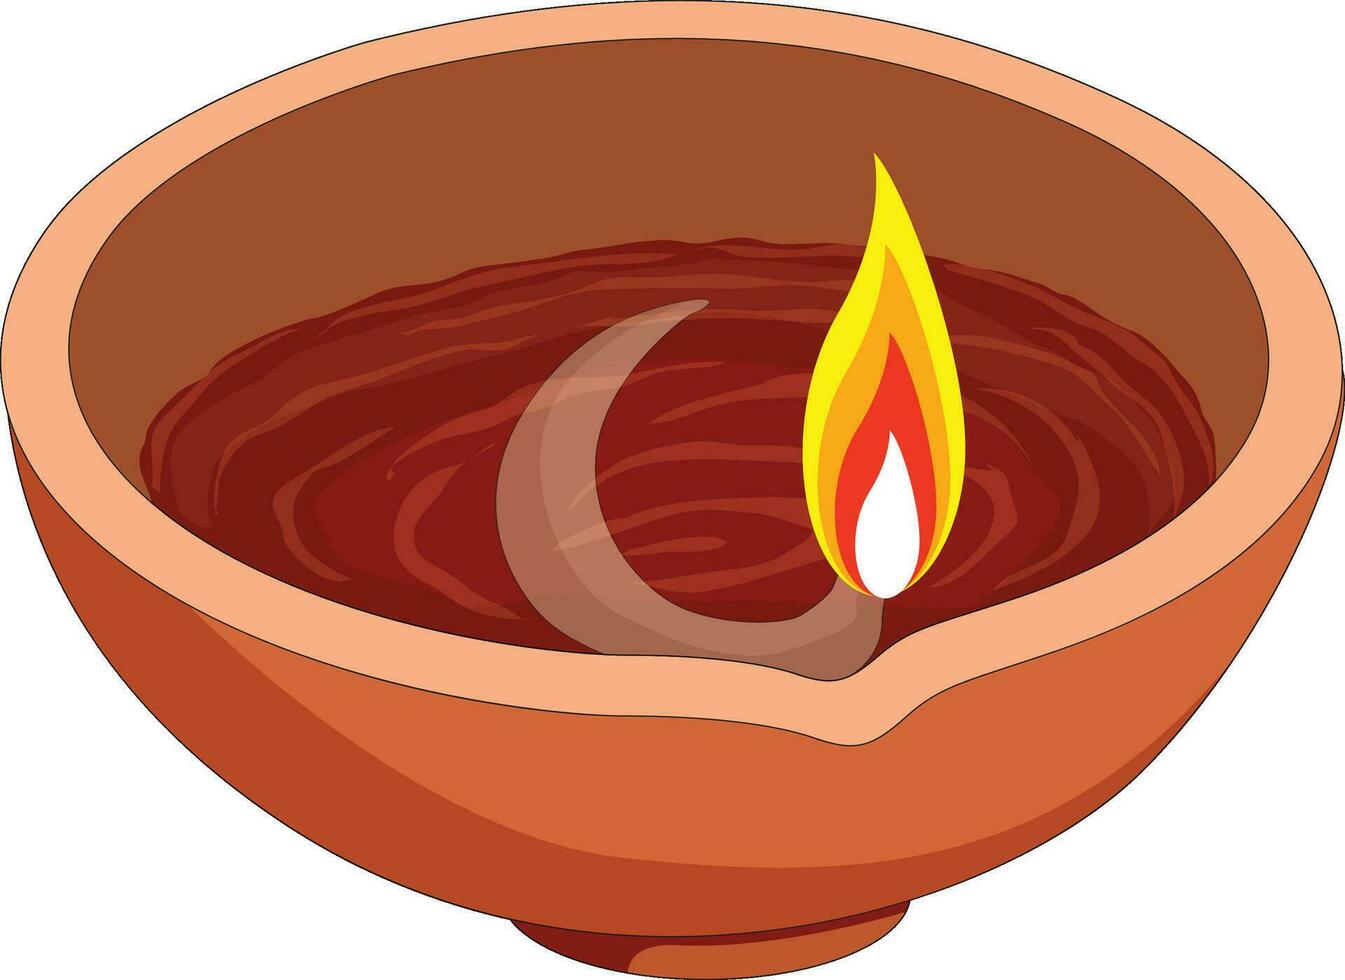 Diwali lamps isolated vector illustration